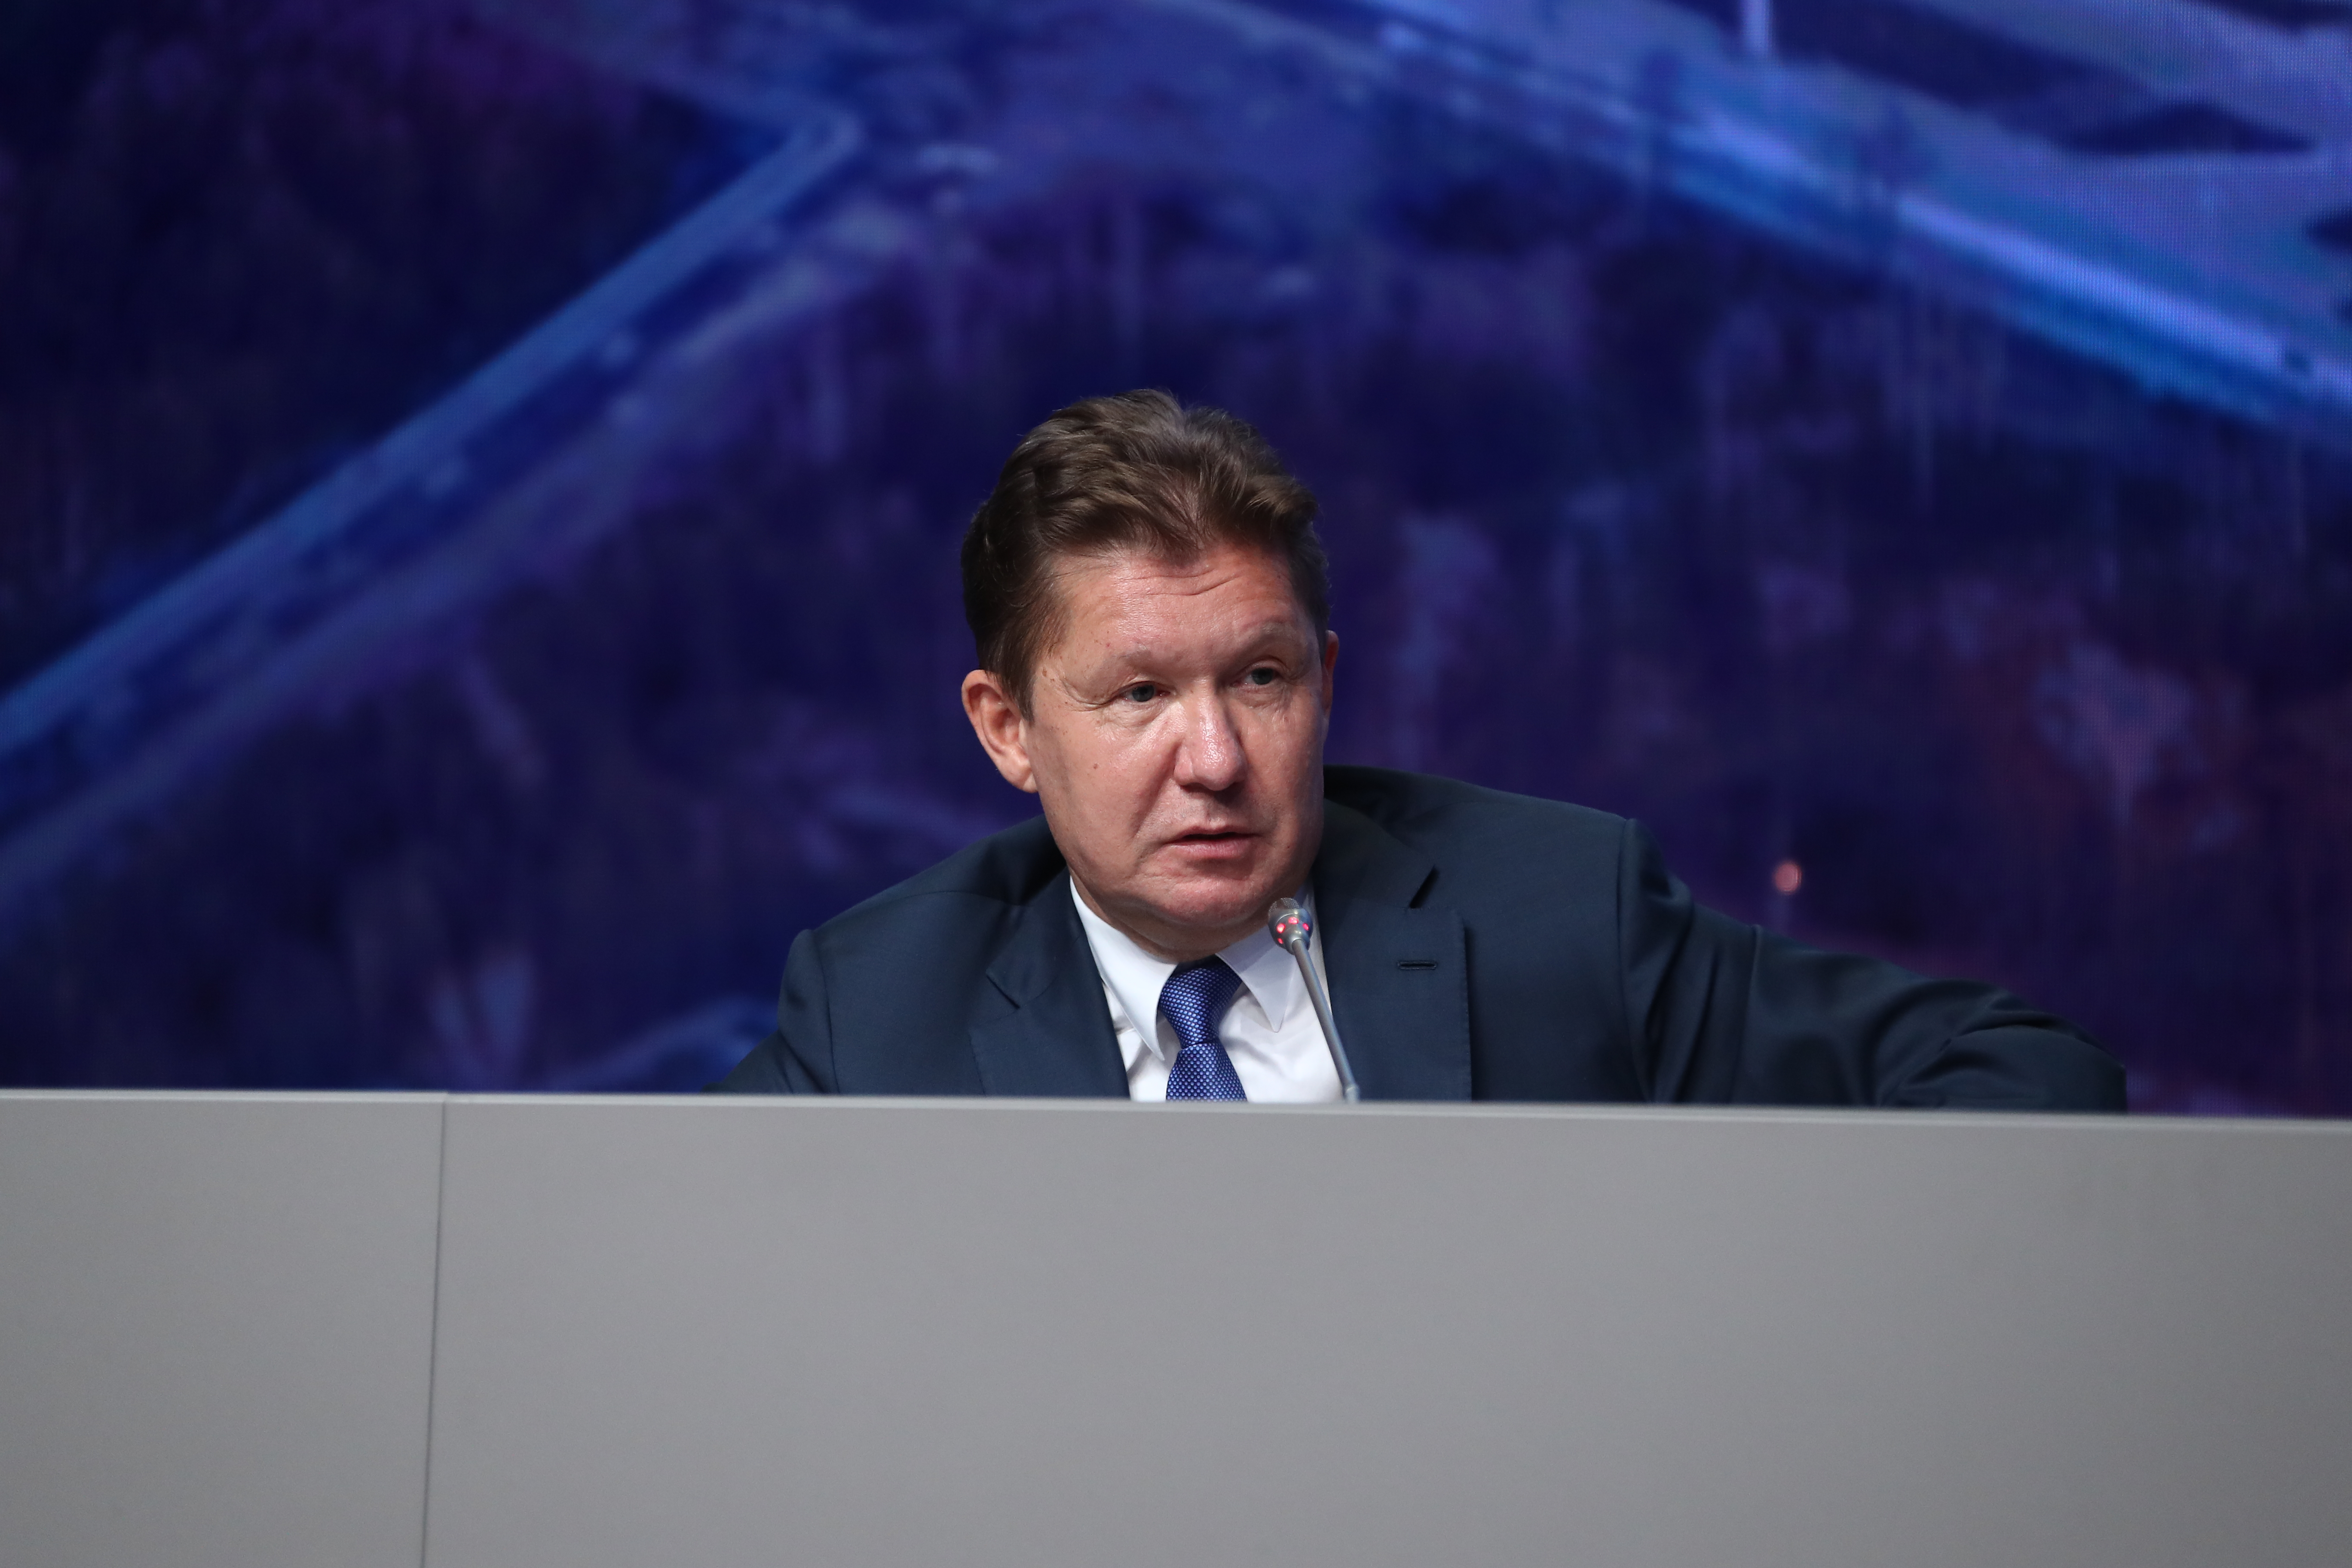 Final Press Conference held with Gazprom Board of Directors and Management Committee Chairmen